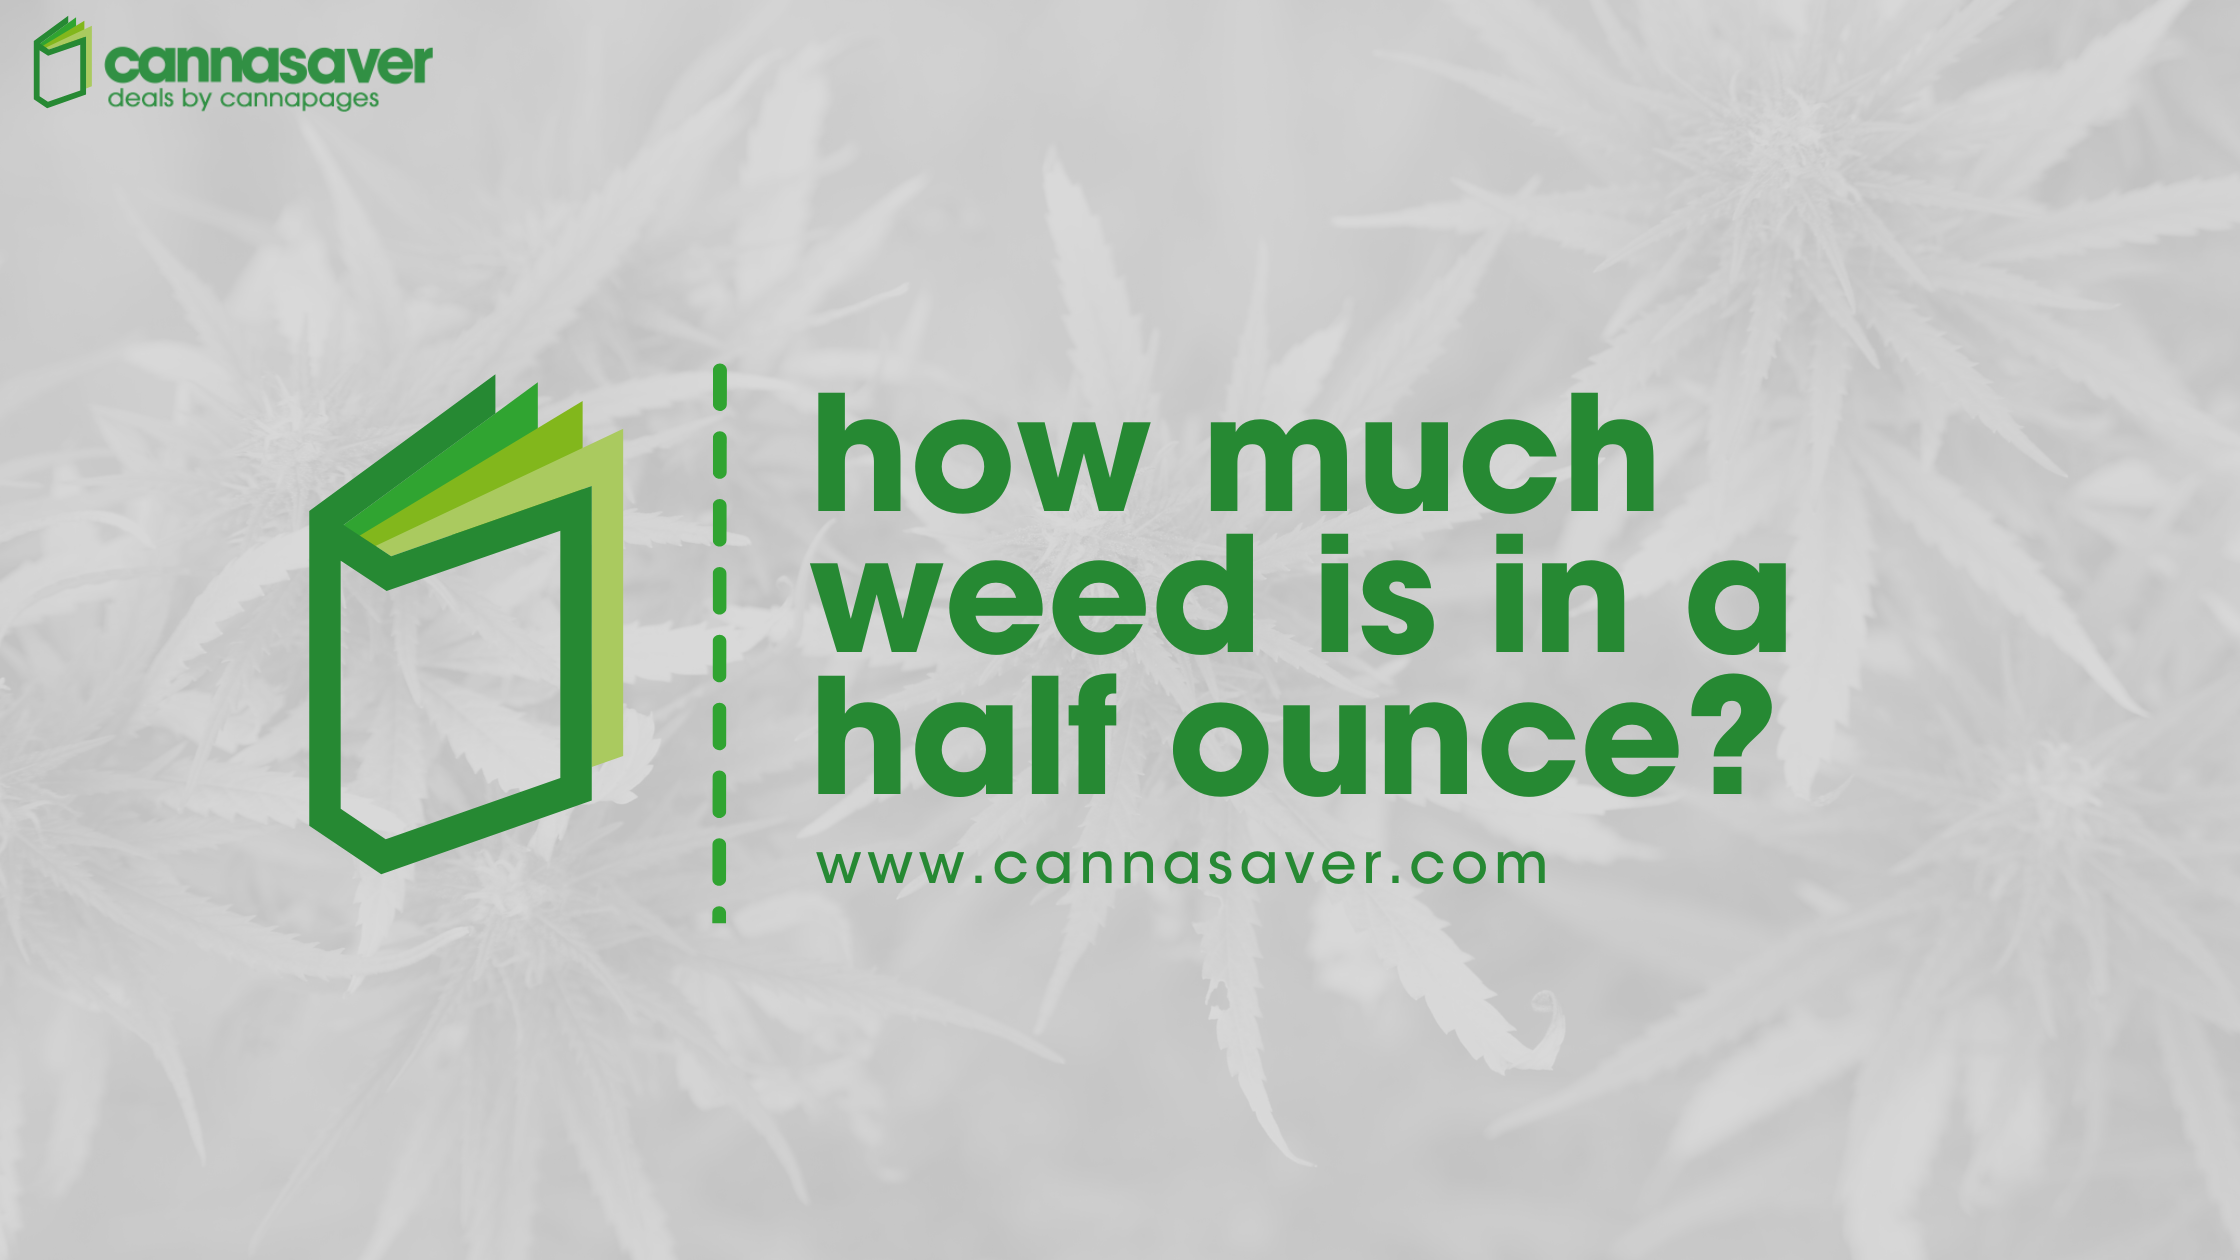 How Much Weed is in a Half Ounce?